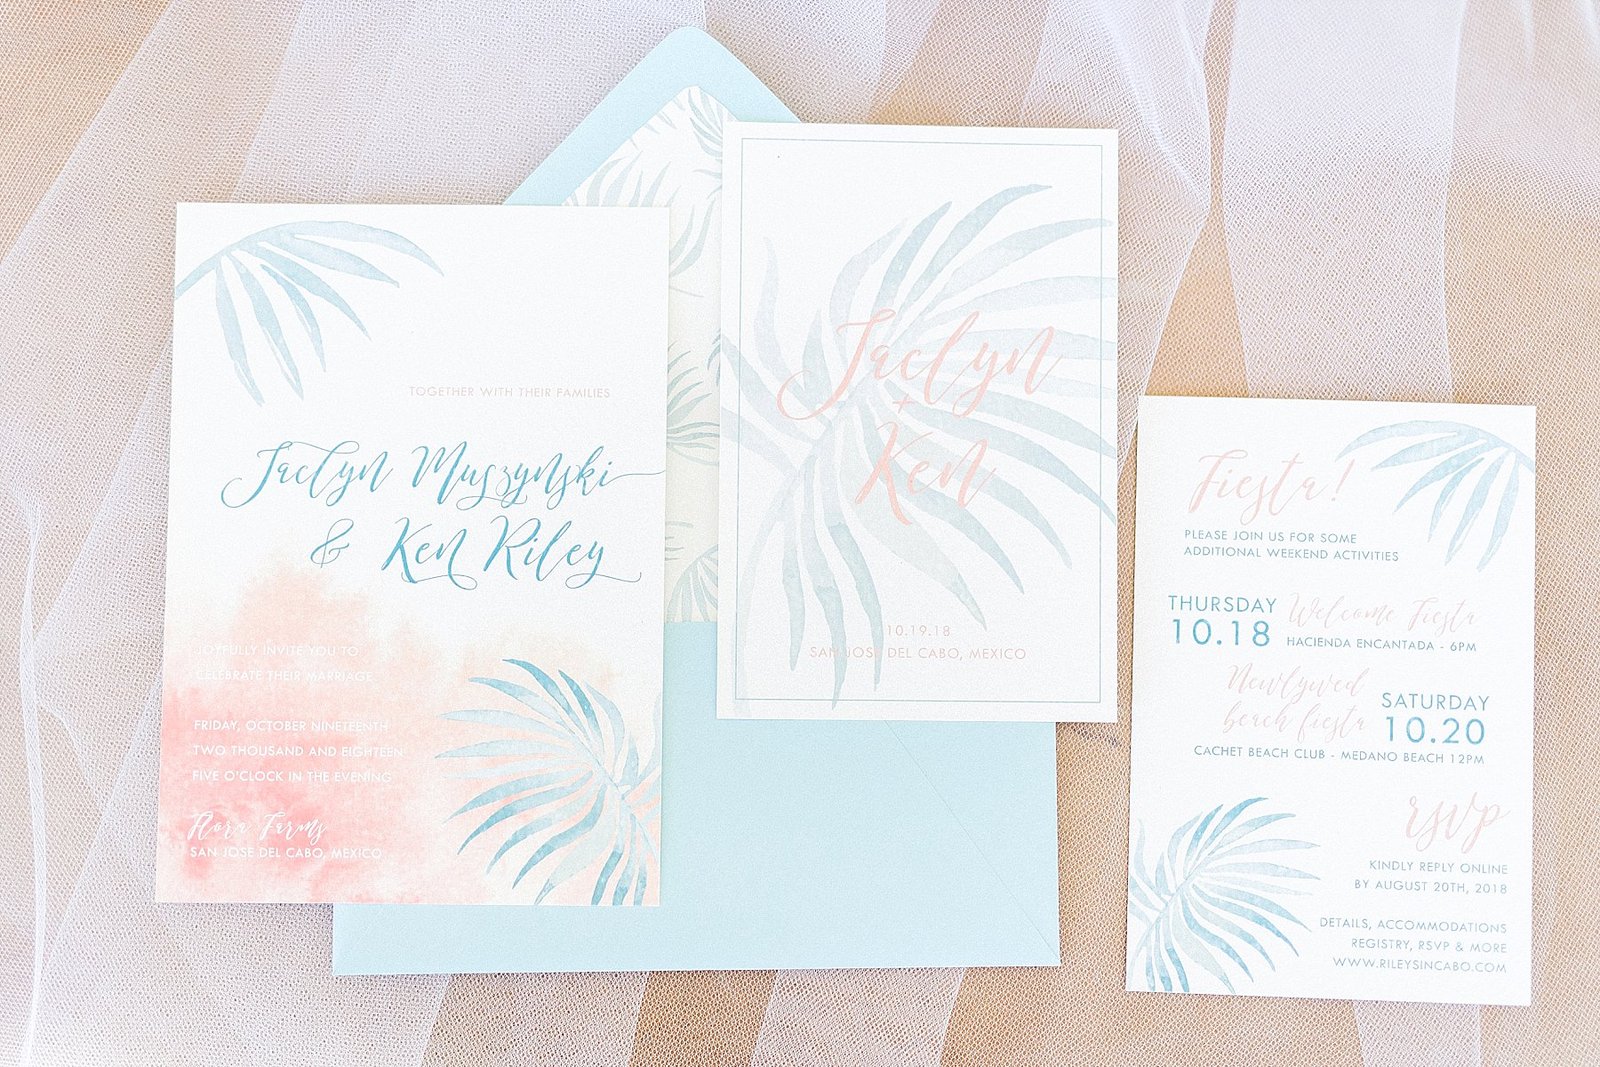 Wedding invitation for Wedding in Cabo San Lucas Mexico. The wedding was at Flora Farms and the Wedding Planners are Cabo Wedding Services with Jesse Wolff